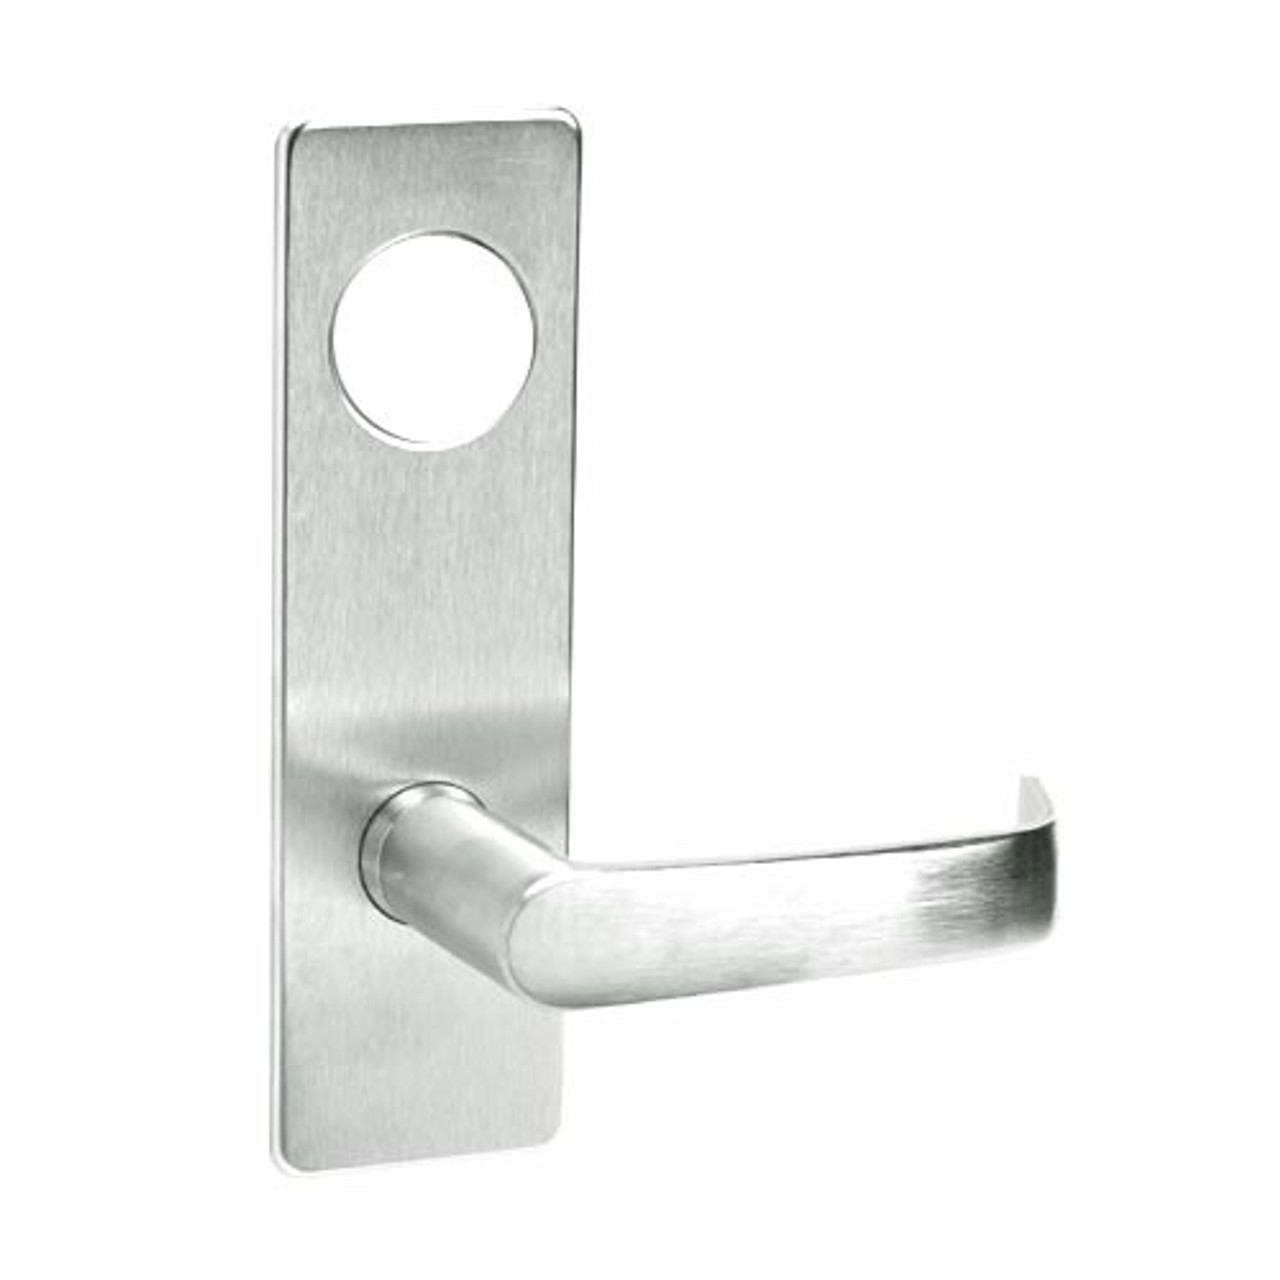 ML2055-NSP-618-CL7 Corbin Russwin ML2000 Series IC 7-Pin Less Core Mortise Classroom Locksets with Newport Lever in Bright Nickel